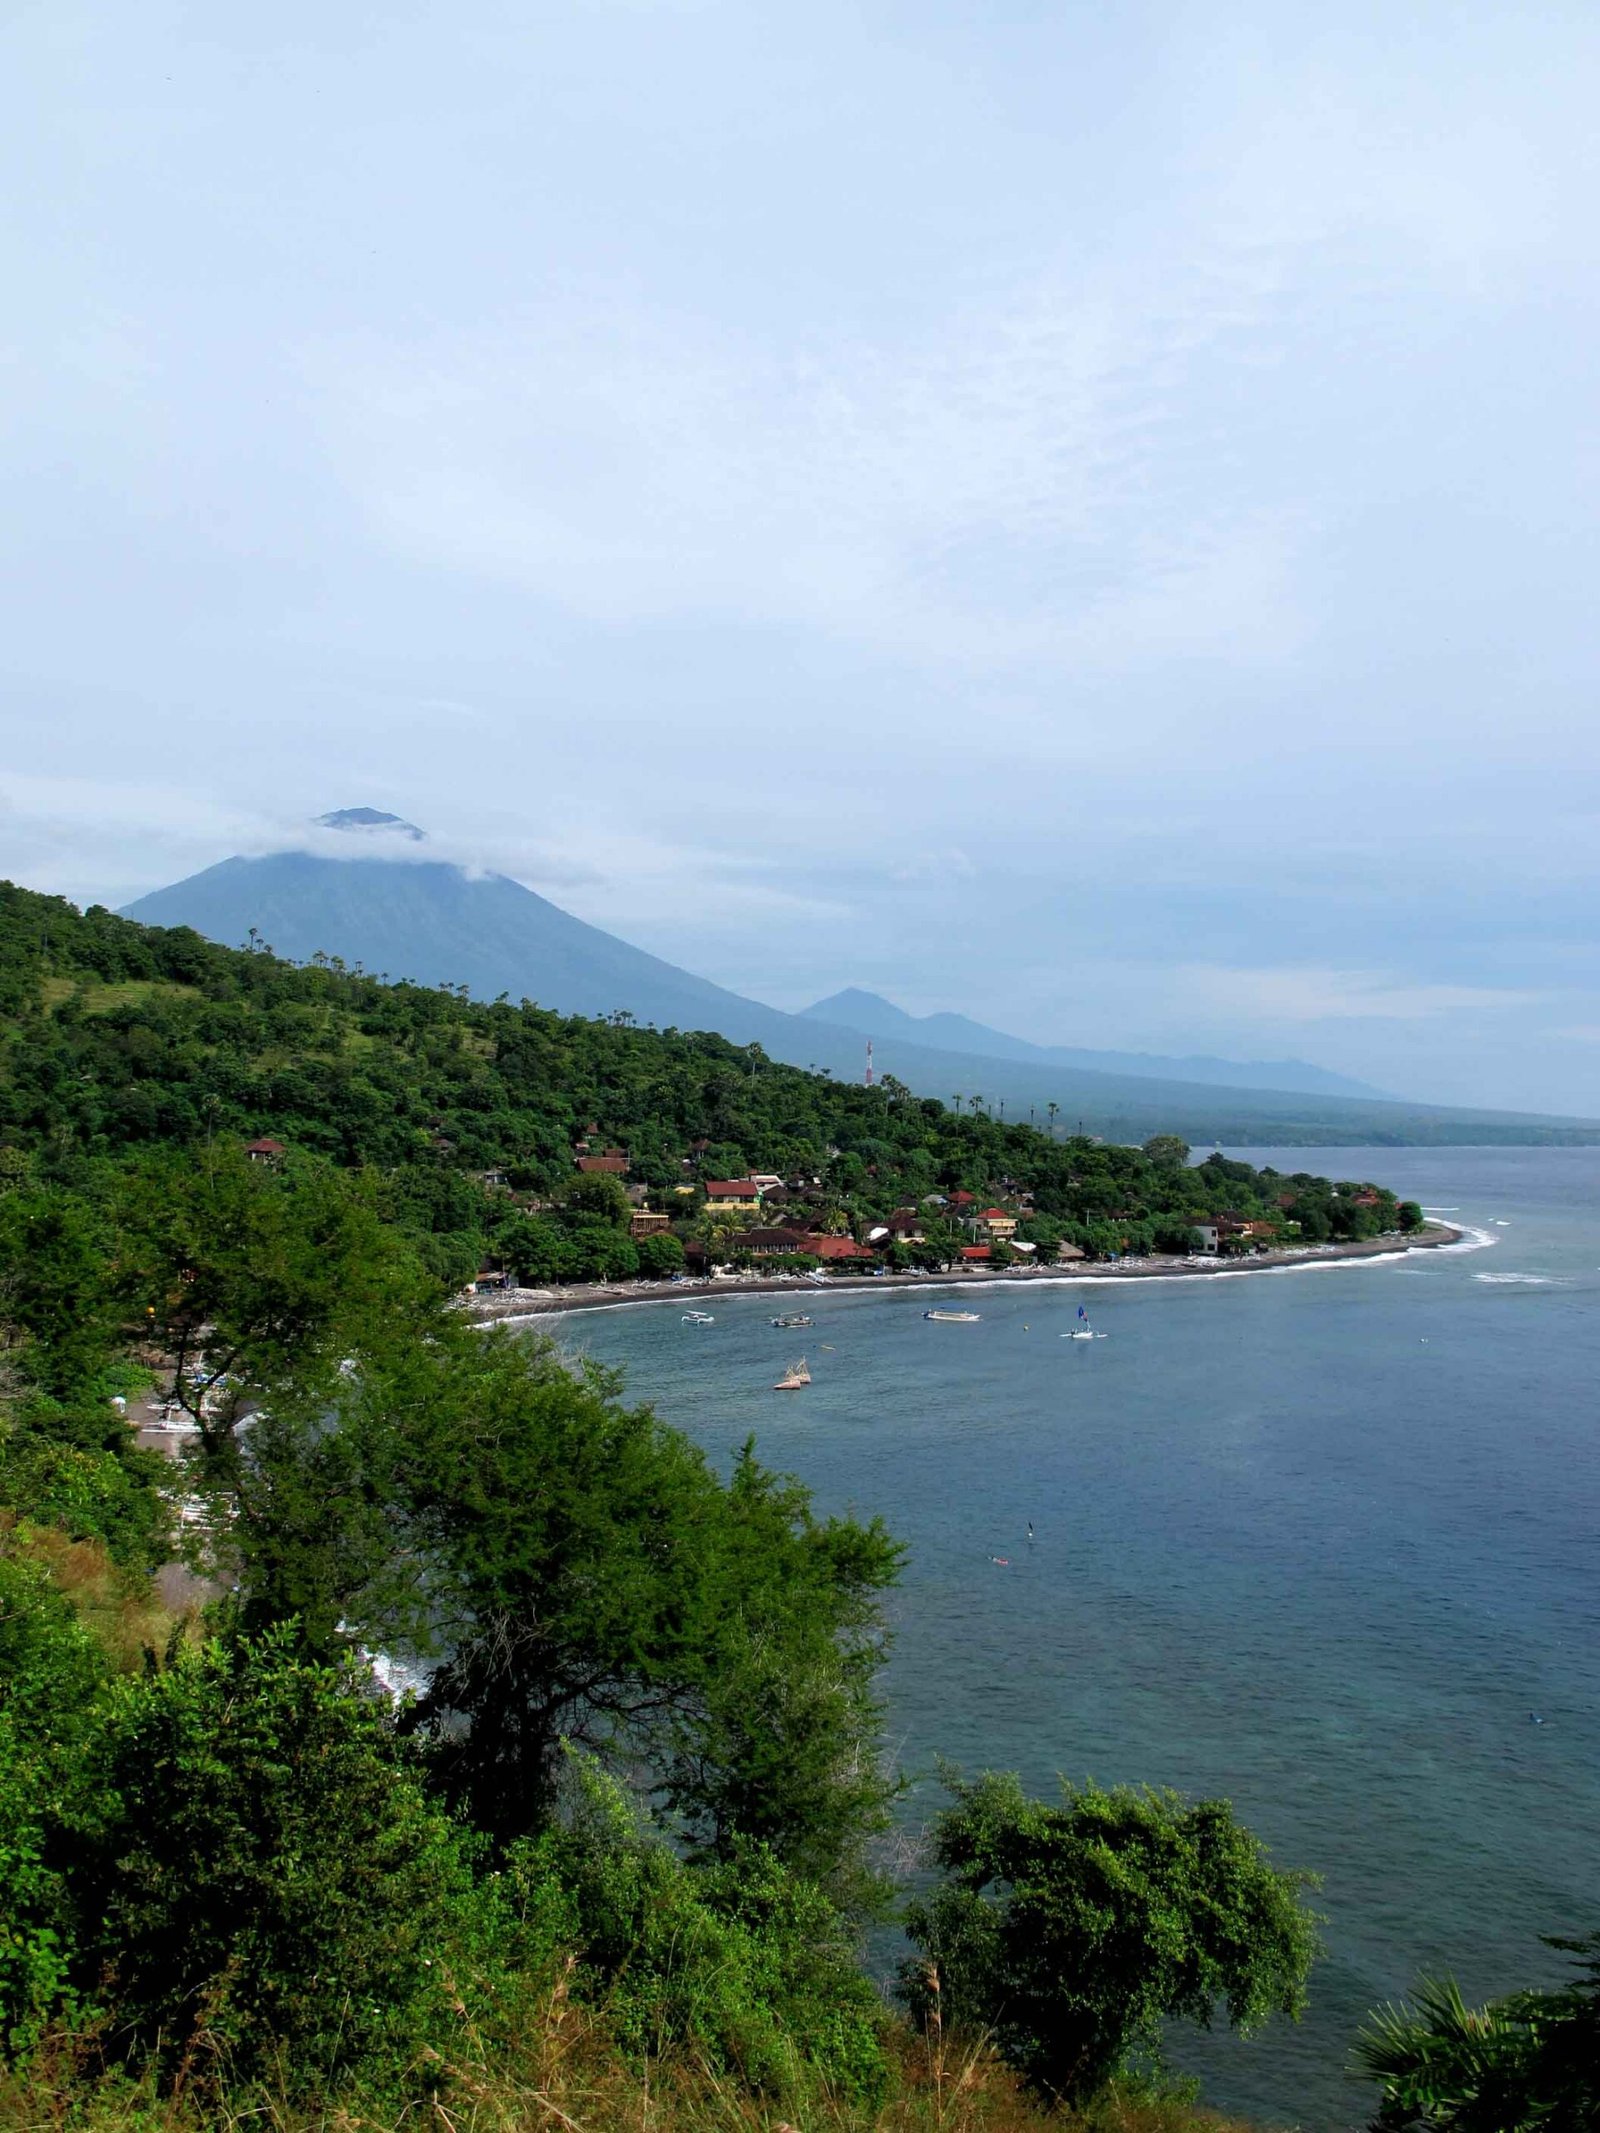 Explore the East coast of bali and its natural wonders with Bali Diversity Dive Resort